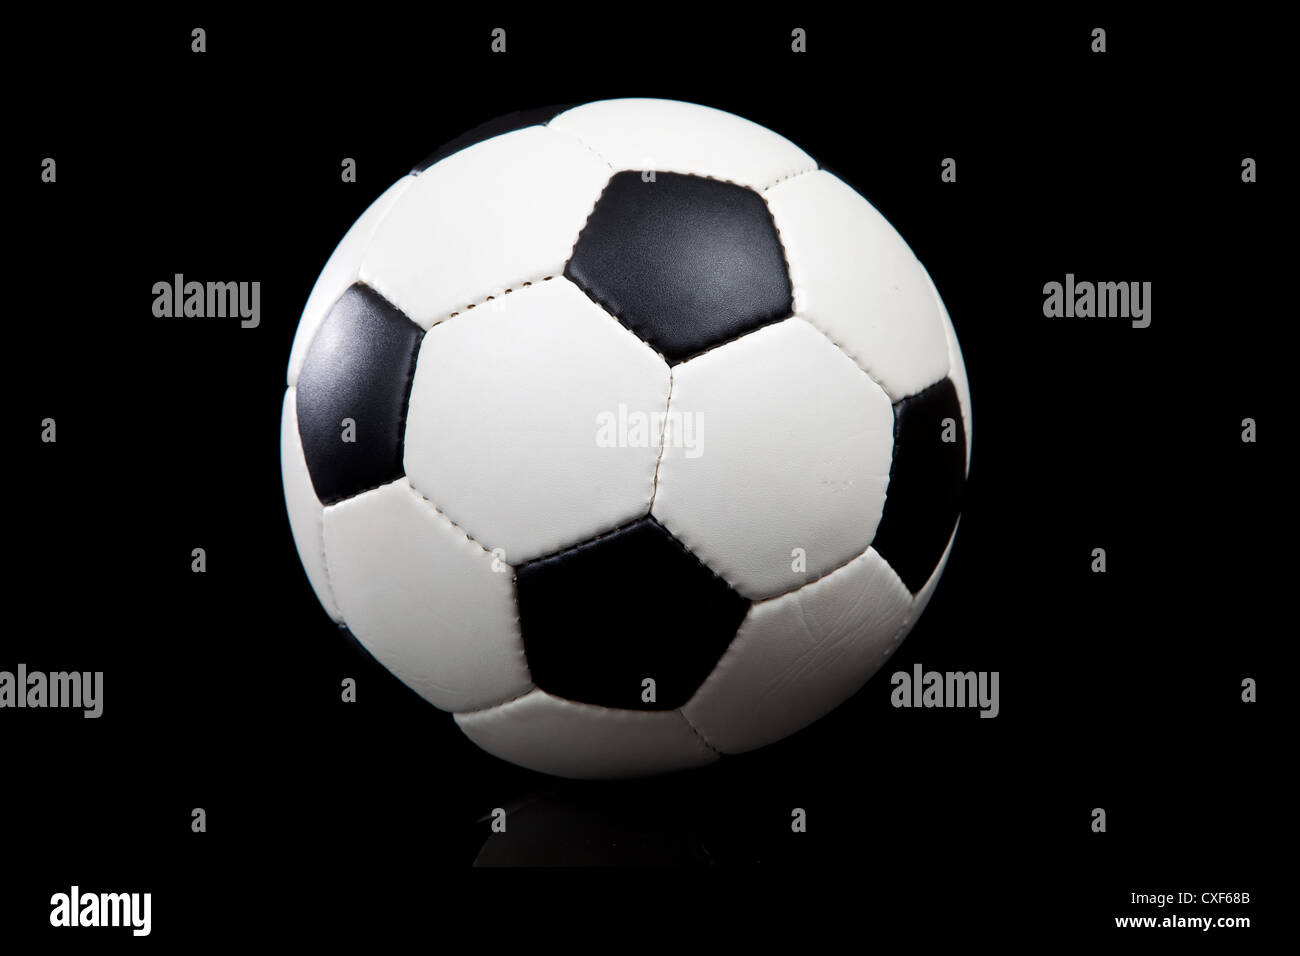 Soccer ball on a black background Stock Photo